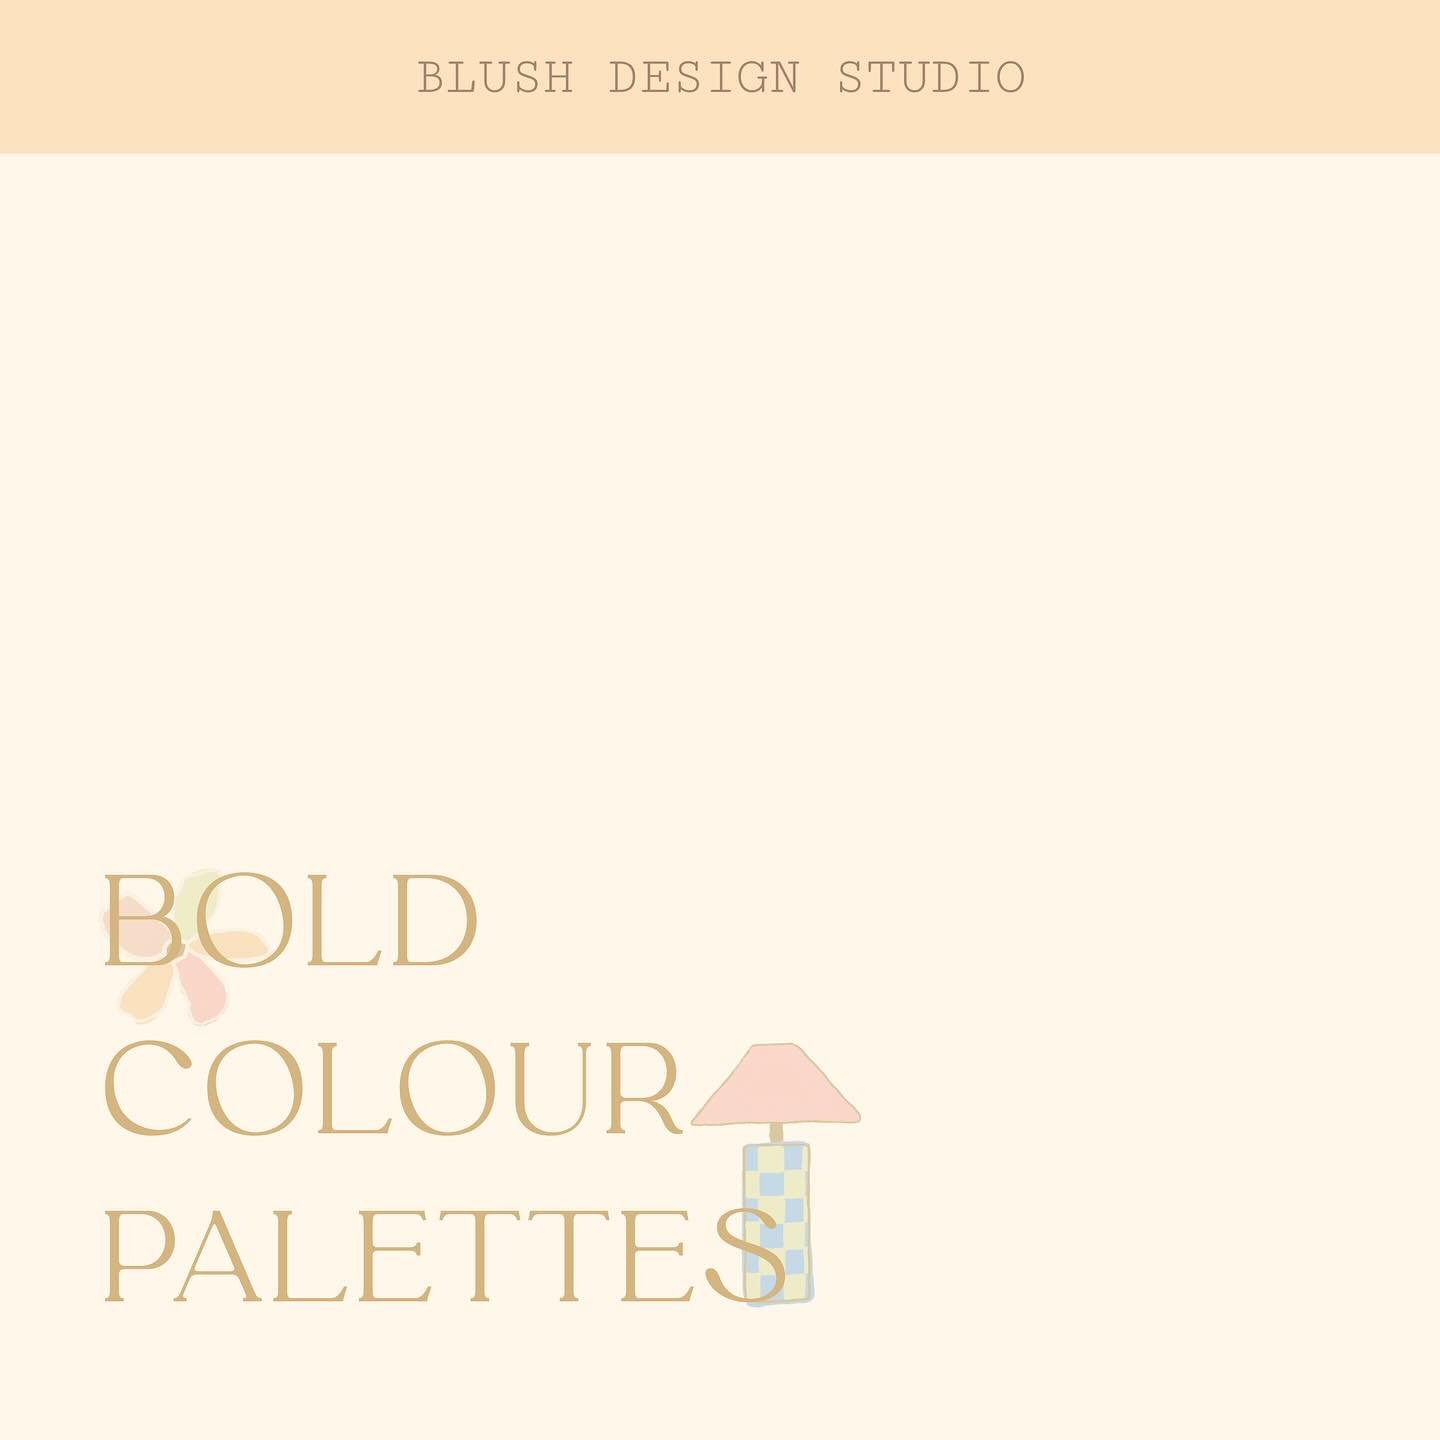 Everyone knows I love a colour palette! I love to push the boundaries with colour in my clients branding. Always on the look out for a wild card or something unexpected. Even in a softer more subtle palette I love to find a way to make it a bit diffe